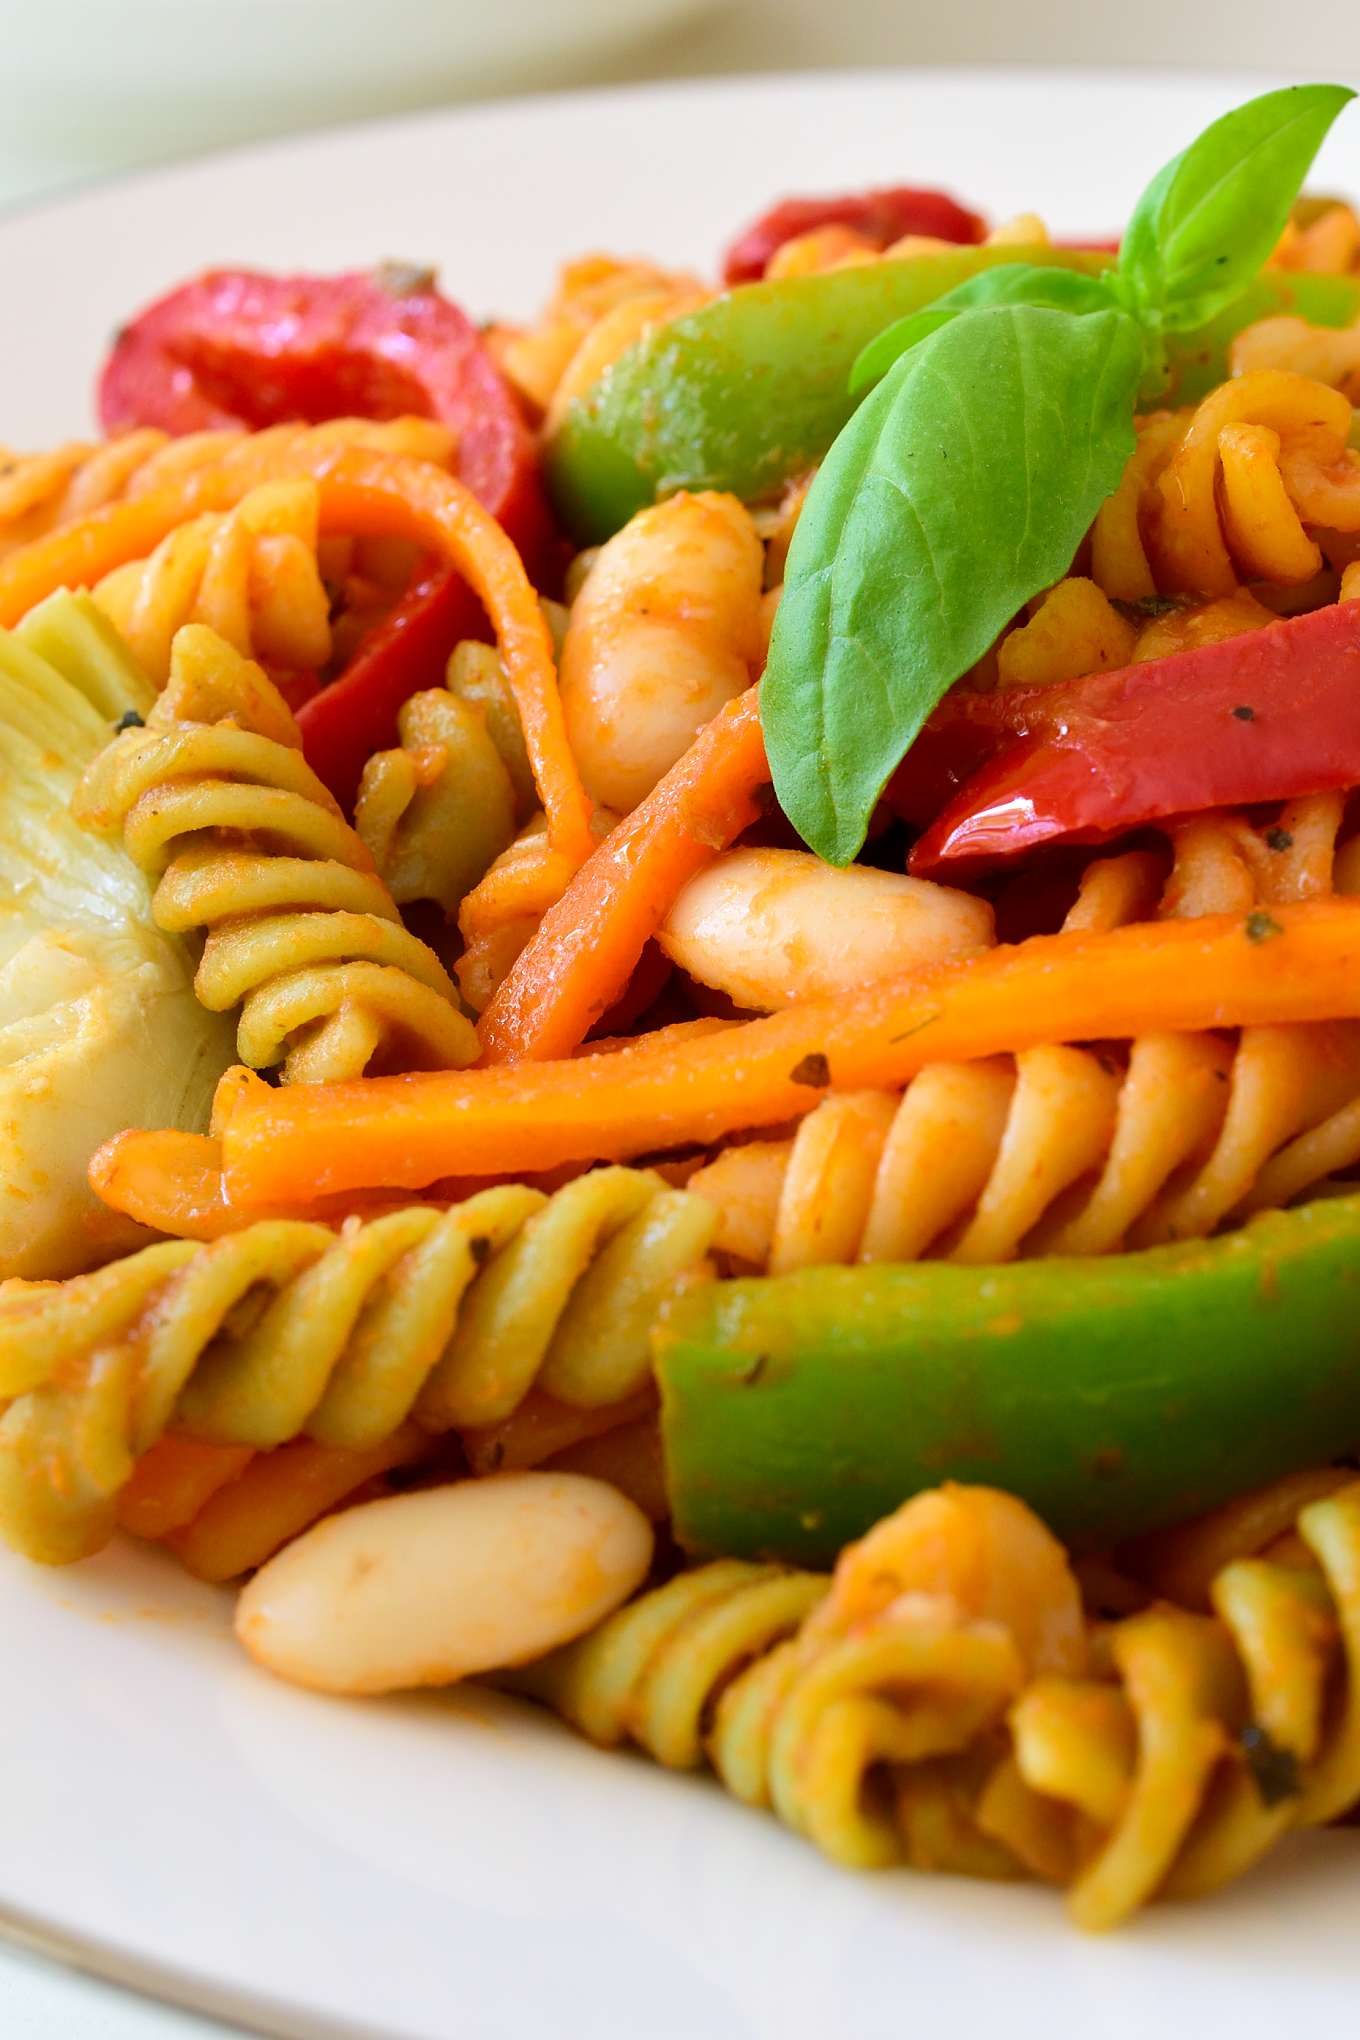 This vegetarian Sicilian pasta recipe is easy to make and full of the flavours of the Mediterranean. Sweet bell pepper, crisp carrots, artichoke hearts and white beans in a simple tomato sauce make a hearty and satisfying 15-minute meal.